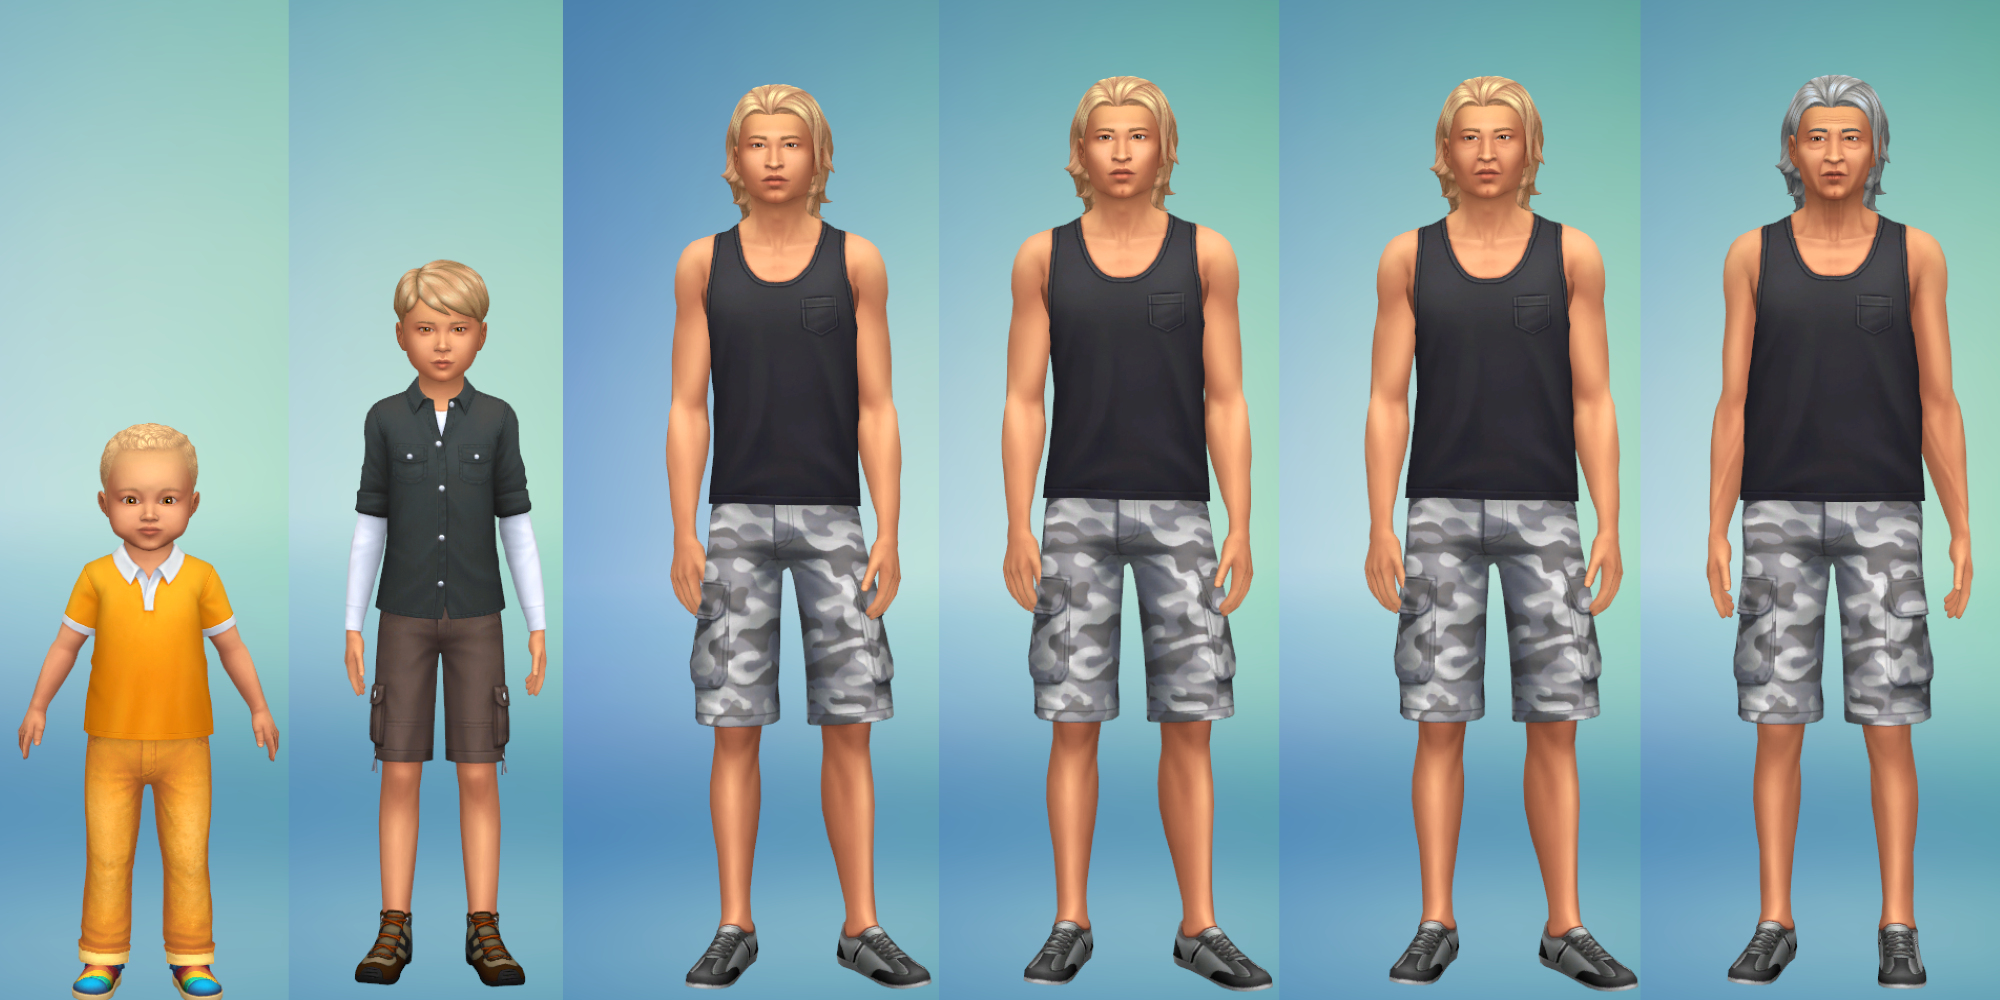 A six-way split grid of a sim from The Sims 4 at each life stage.